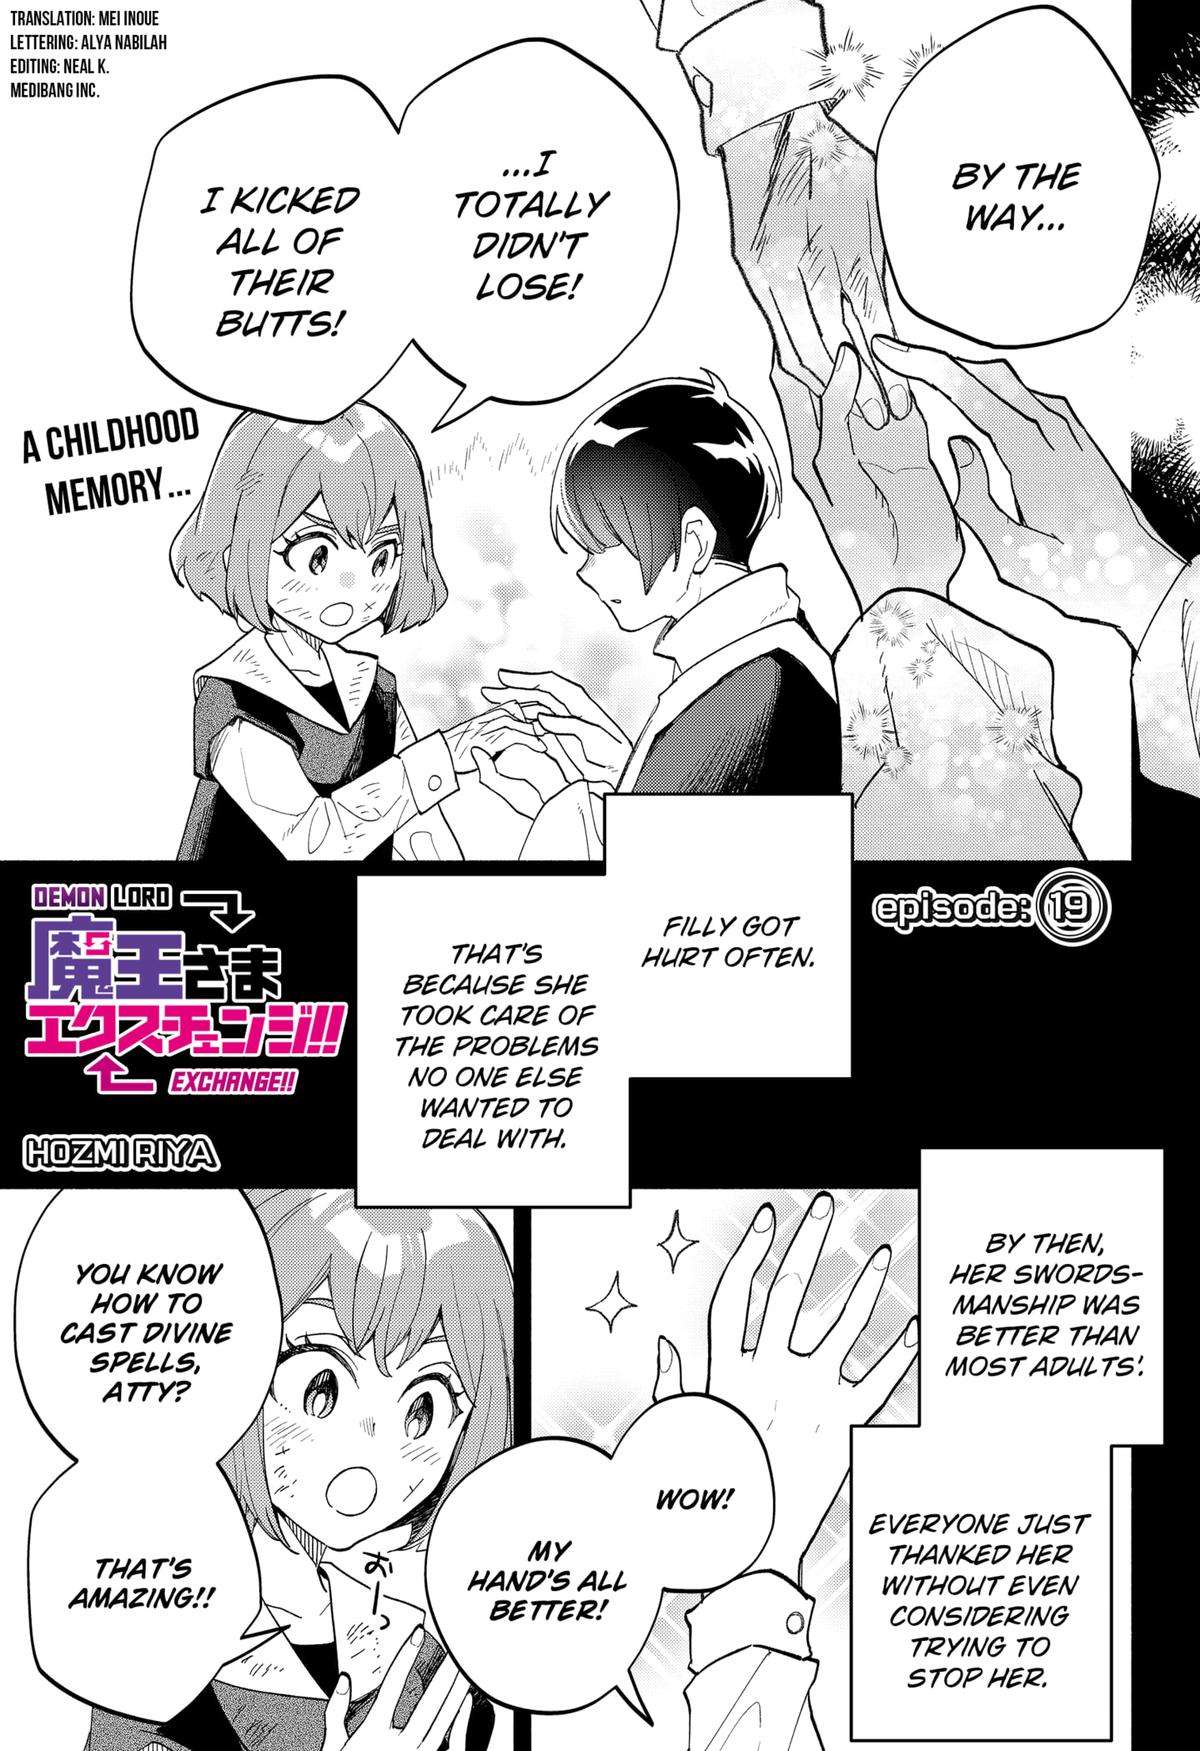 Demon Lord Exchange!! - chapter 19 - #1